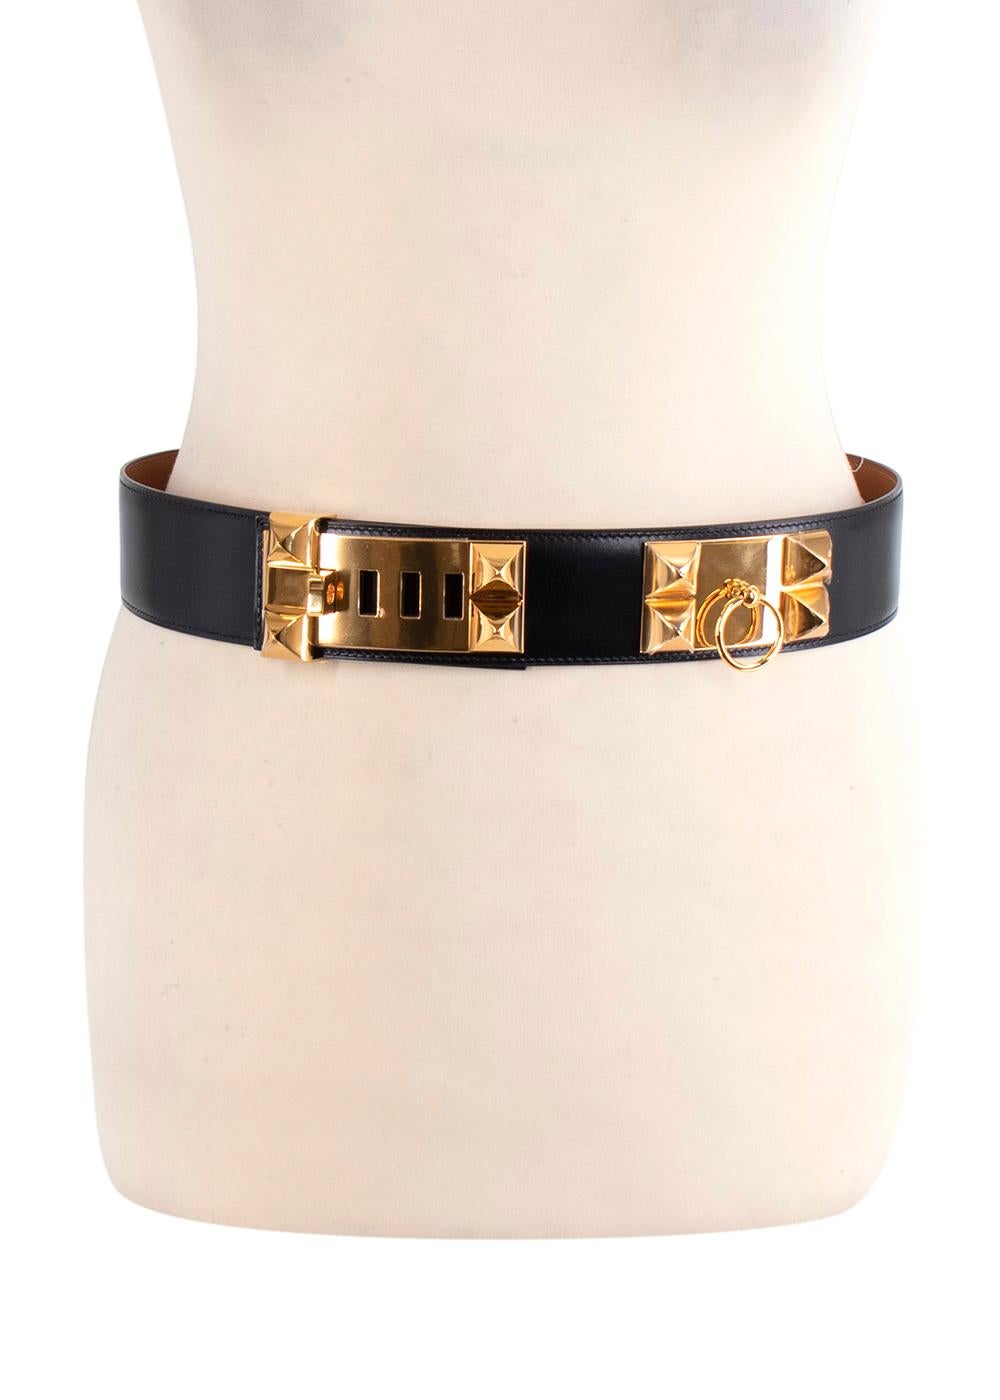 Hermes black Box Calf leather Collier de Chien 50 belt GHW 75

- Date stamp: [R] 2014
- Box calfskin leather belt with gold plated rhodium metal buckle and hardware 
- Light brown leather interior with subtle branding 

Materials
Leather
Rhodium